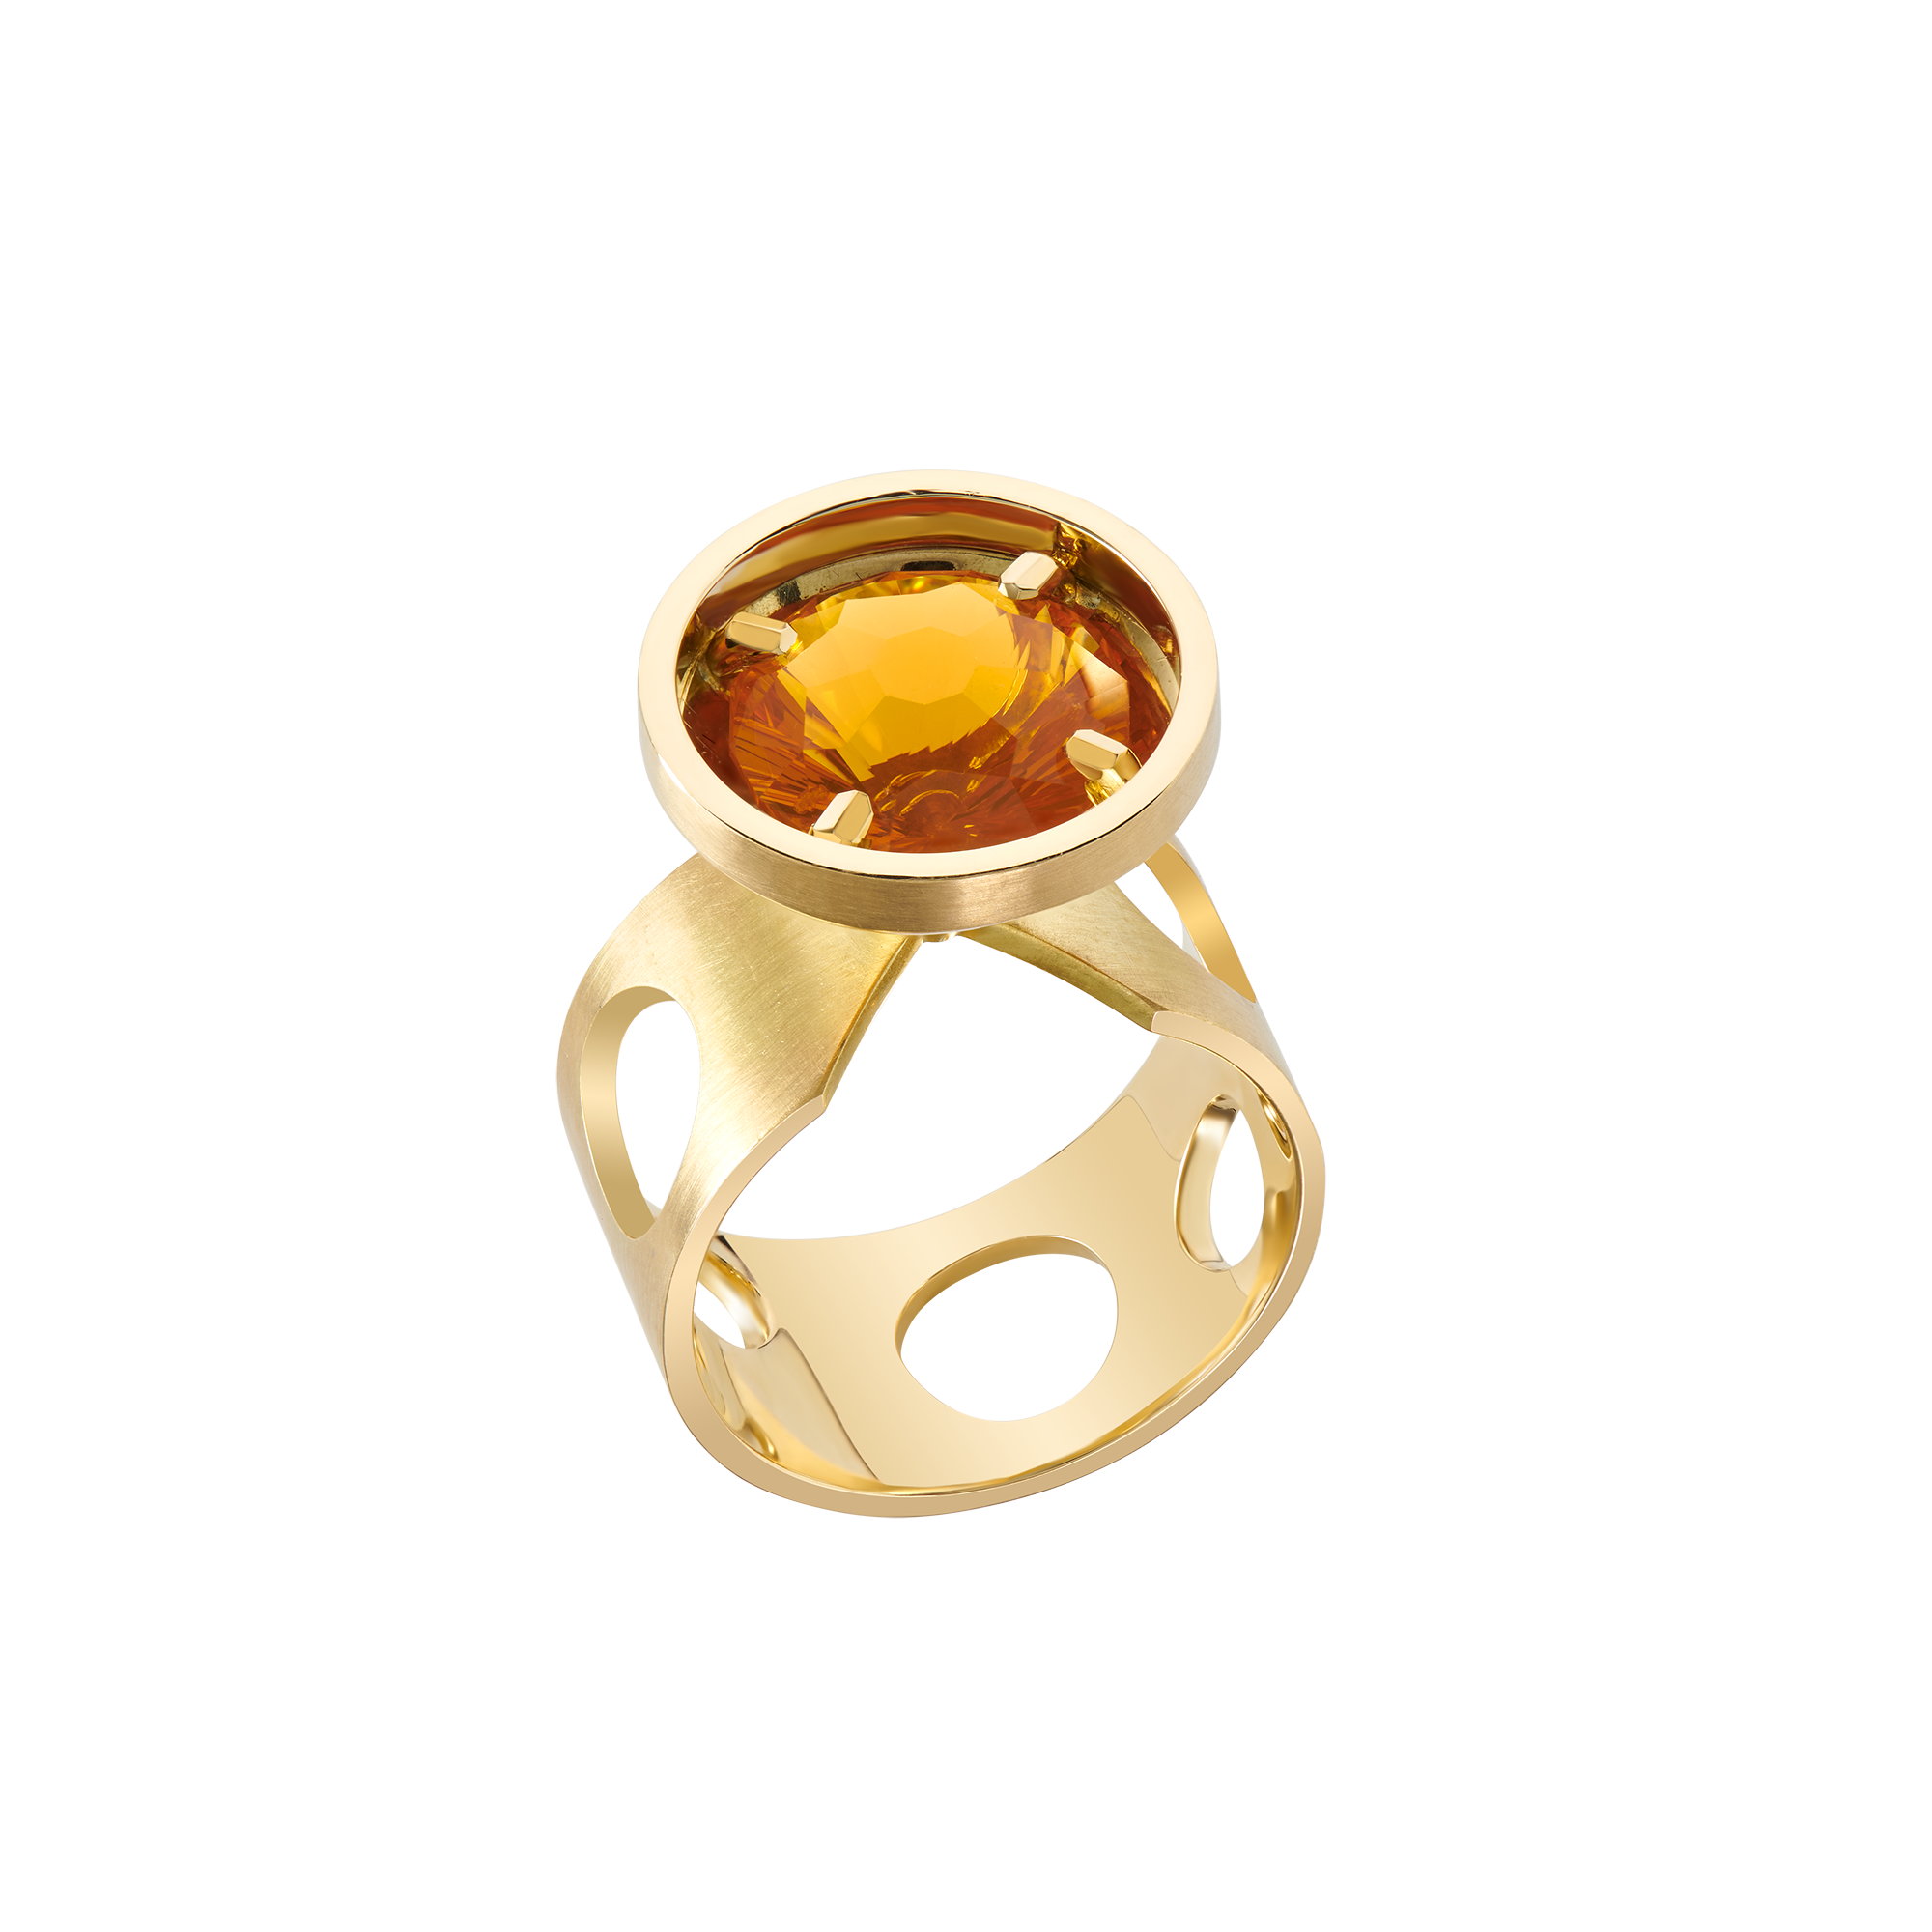 Perspective photograph on white background BETELGEUSE FIRE OPAL RING in 18 carat gold and special cut fire opal cut by Martin Prinsloo, photographed by Rudolf Cinovkis.